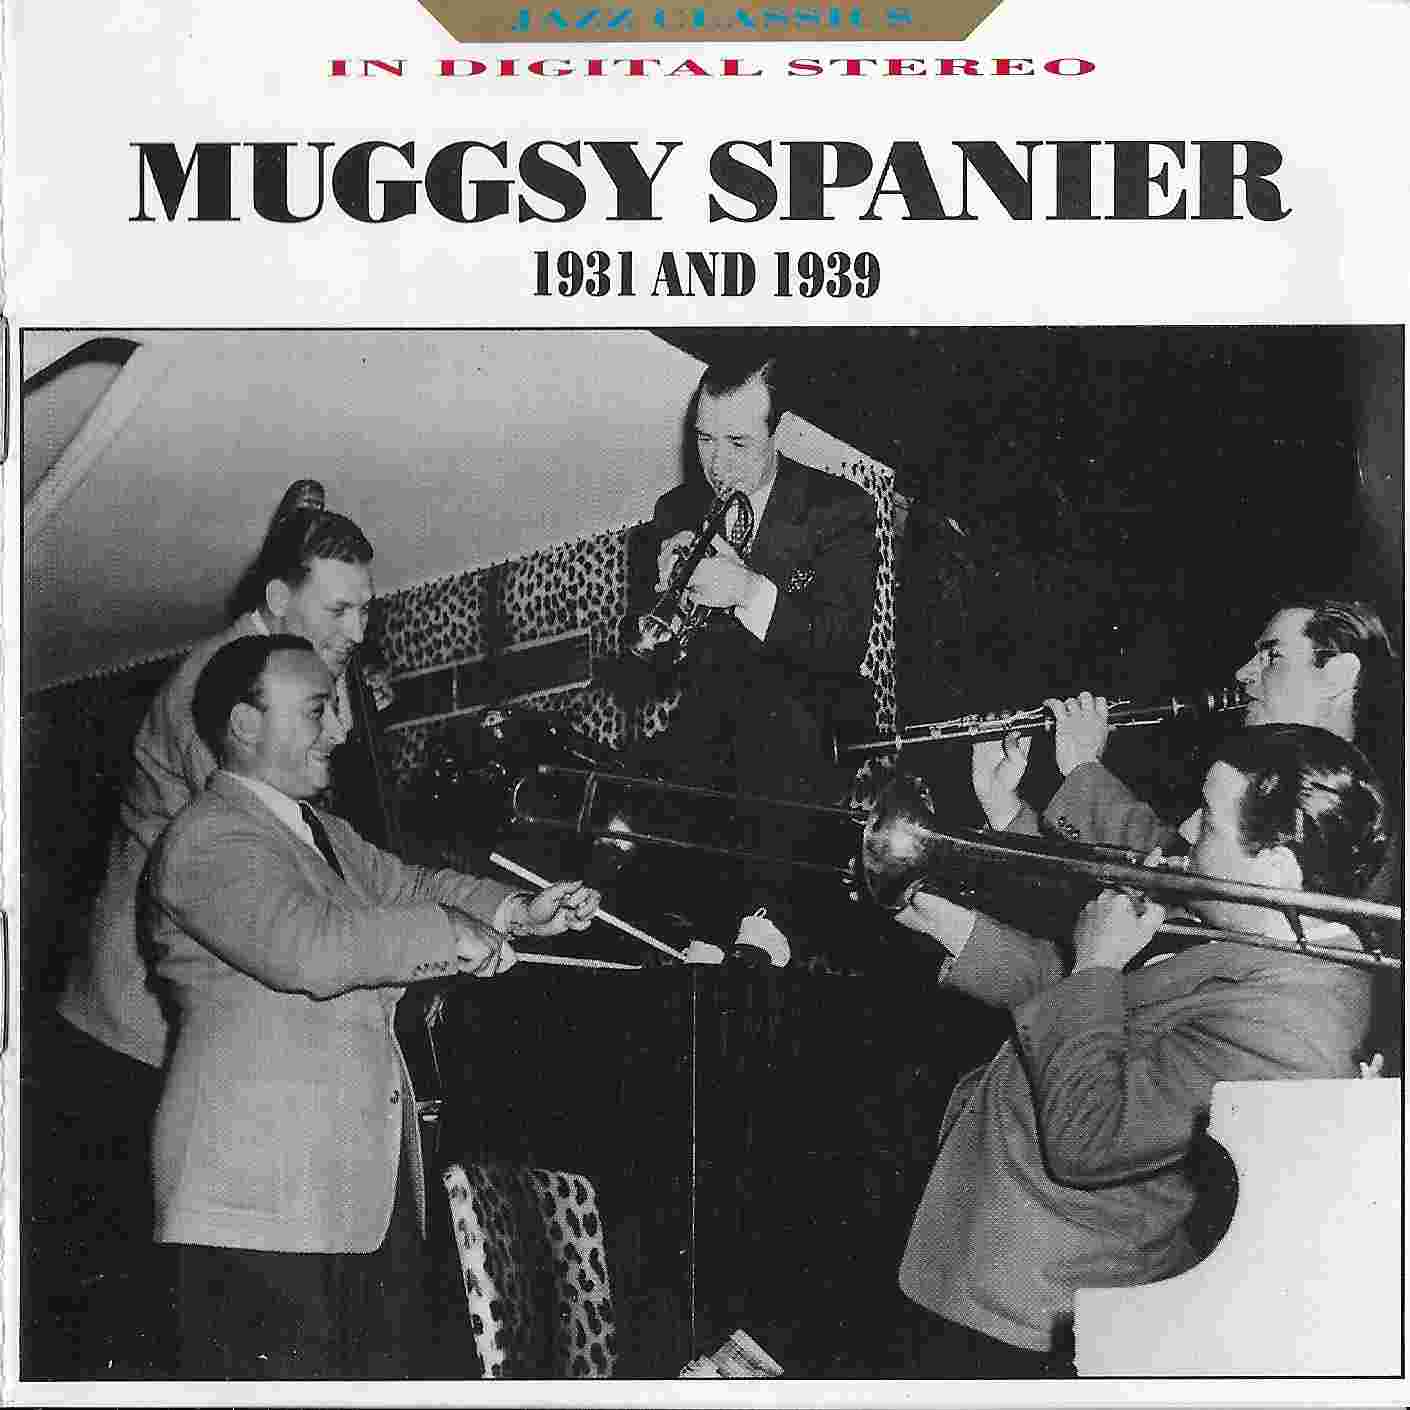 Picture of BBCCD687 Jazz classics - Muggsy Spanier by artist Muggsy Spanier from the BBC cds - Records and Tapes library